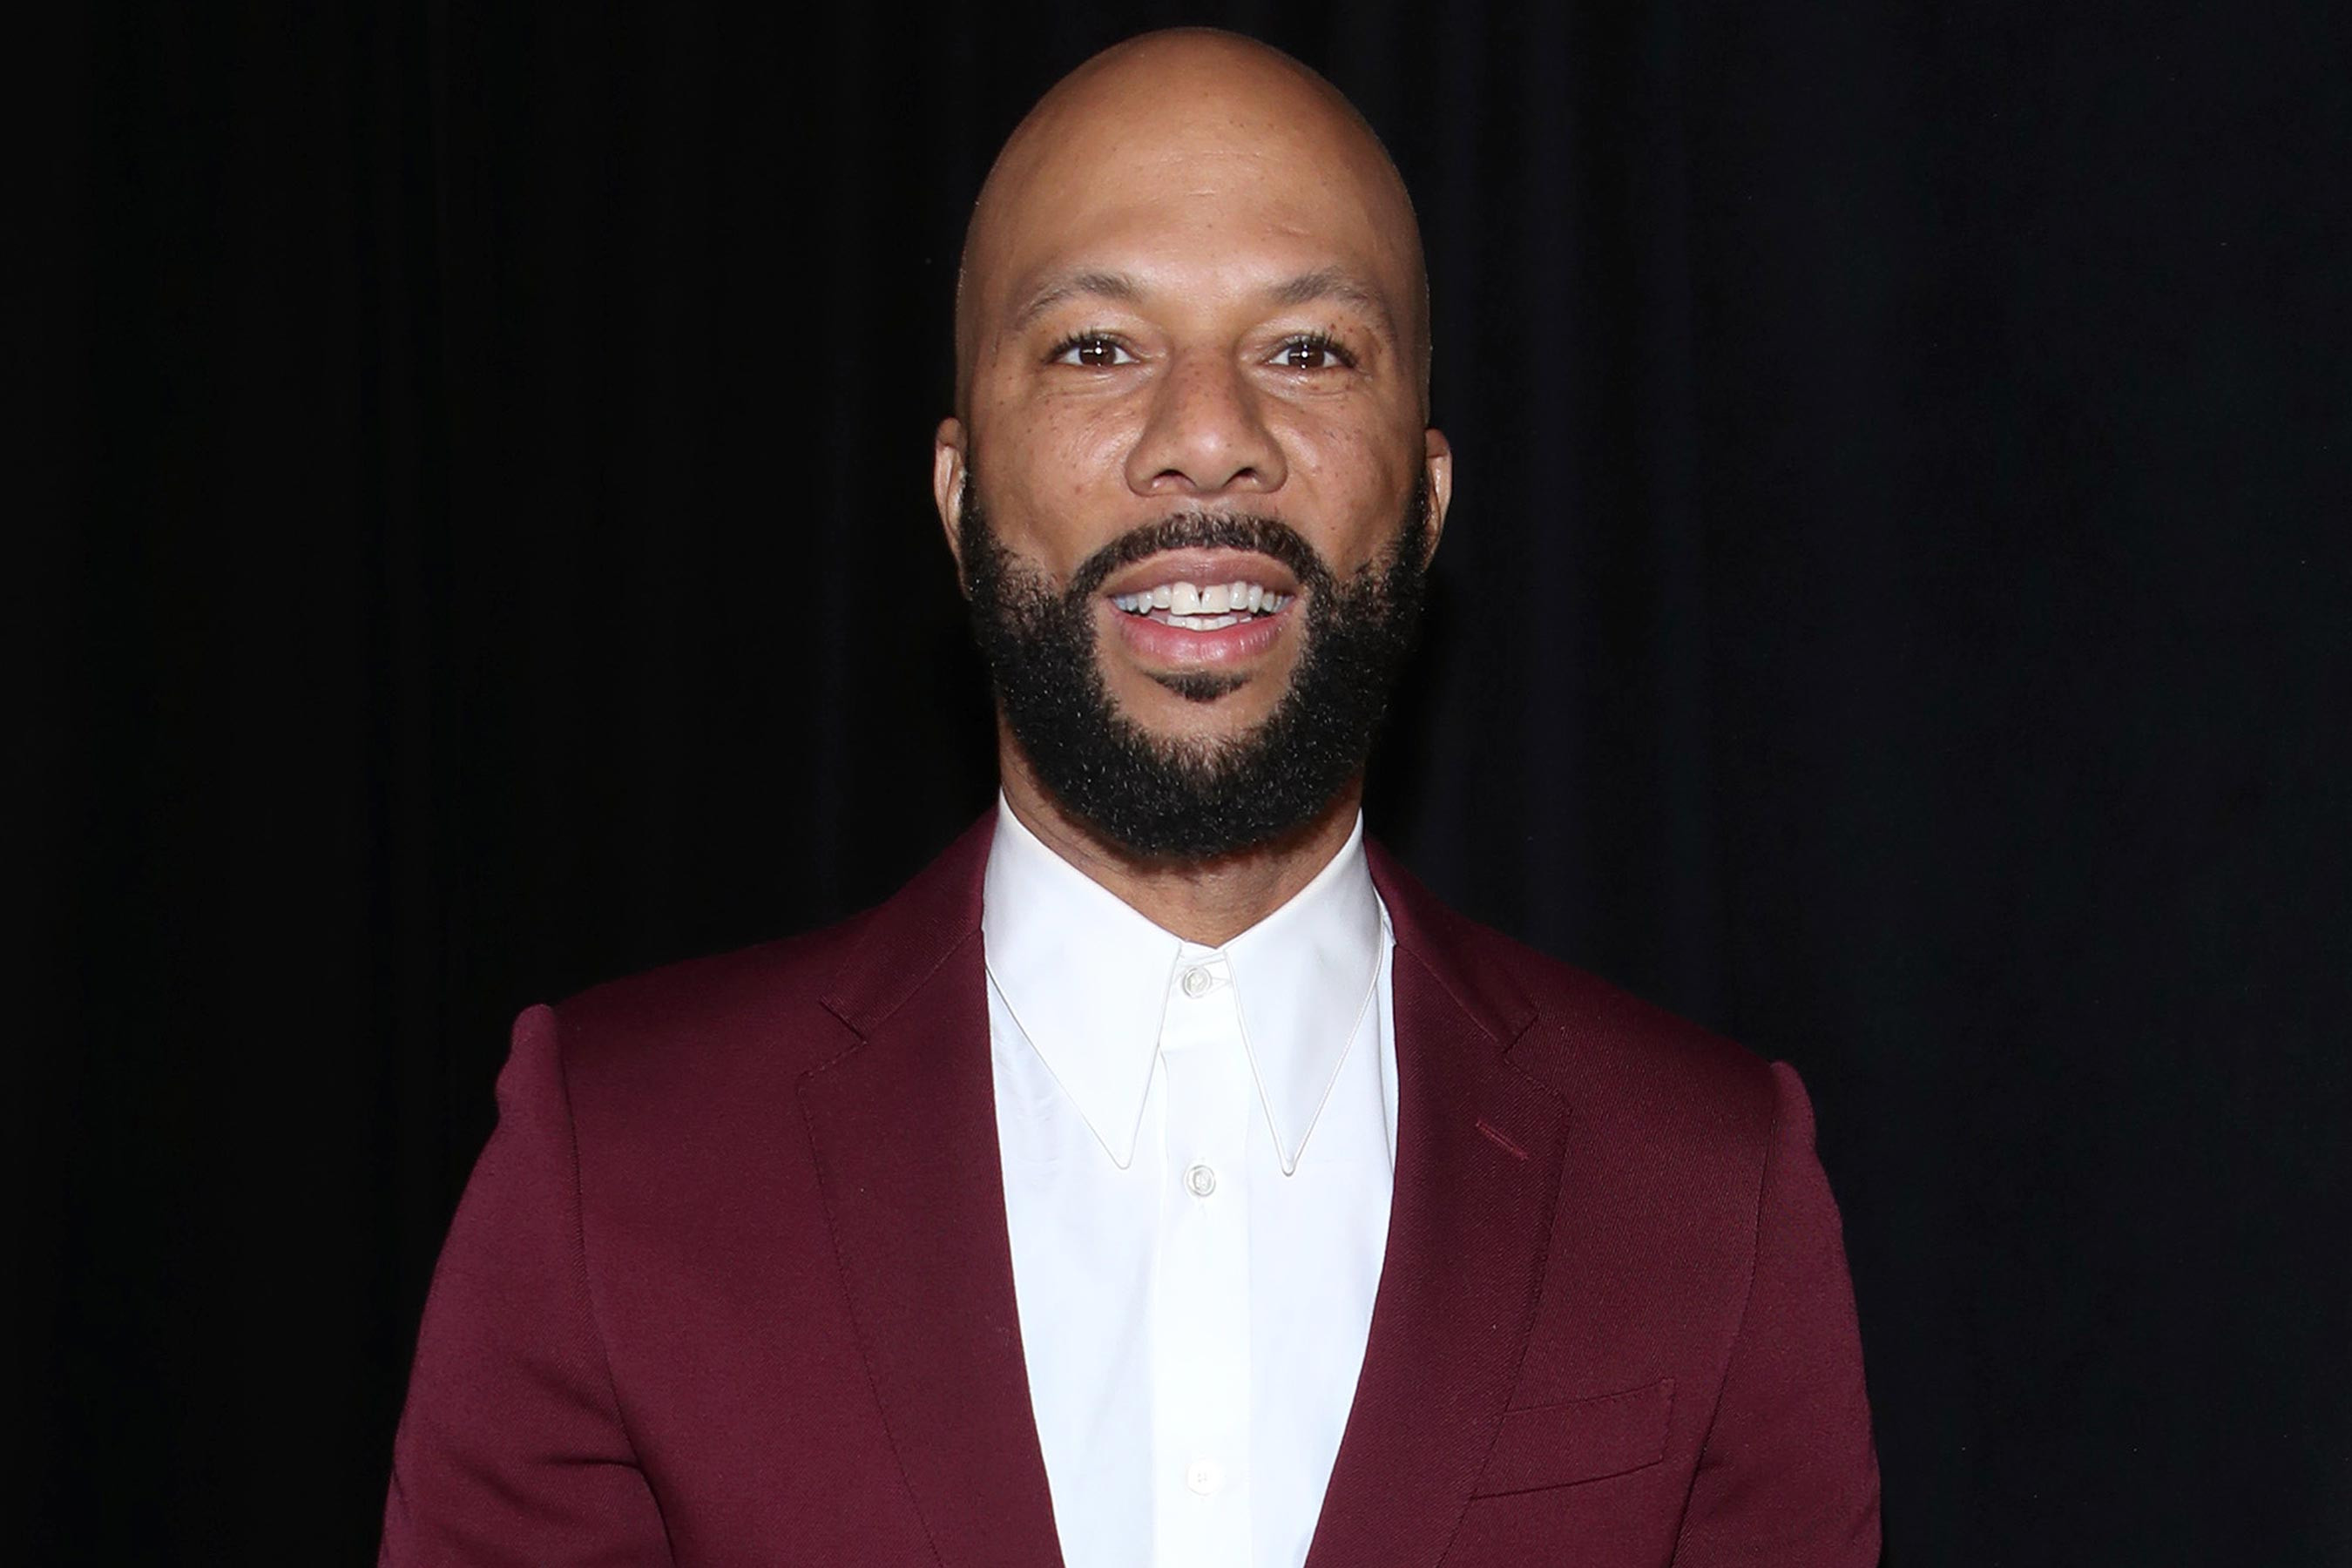 'I was molested as a child' - US rapper Common reveals